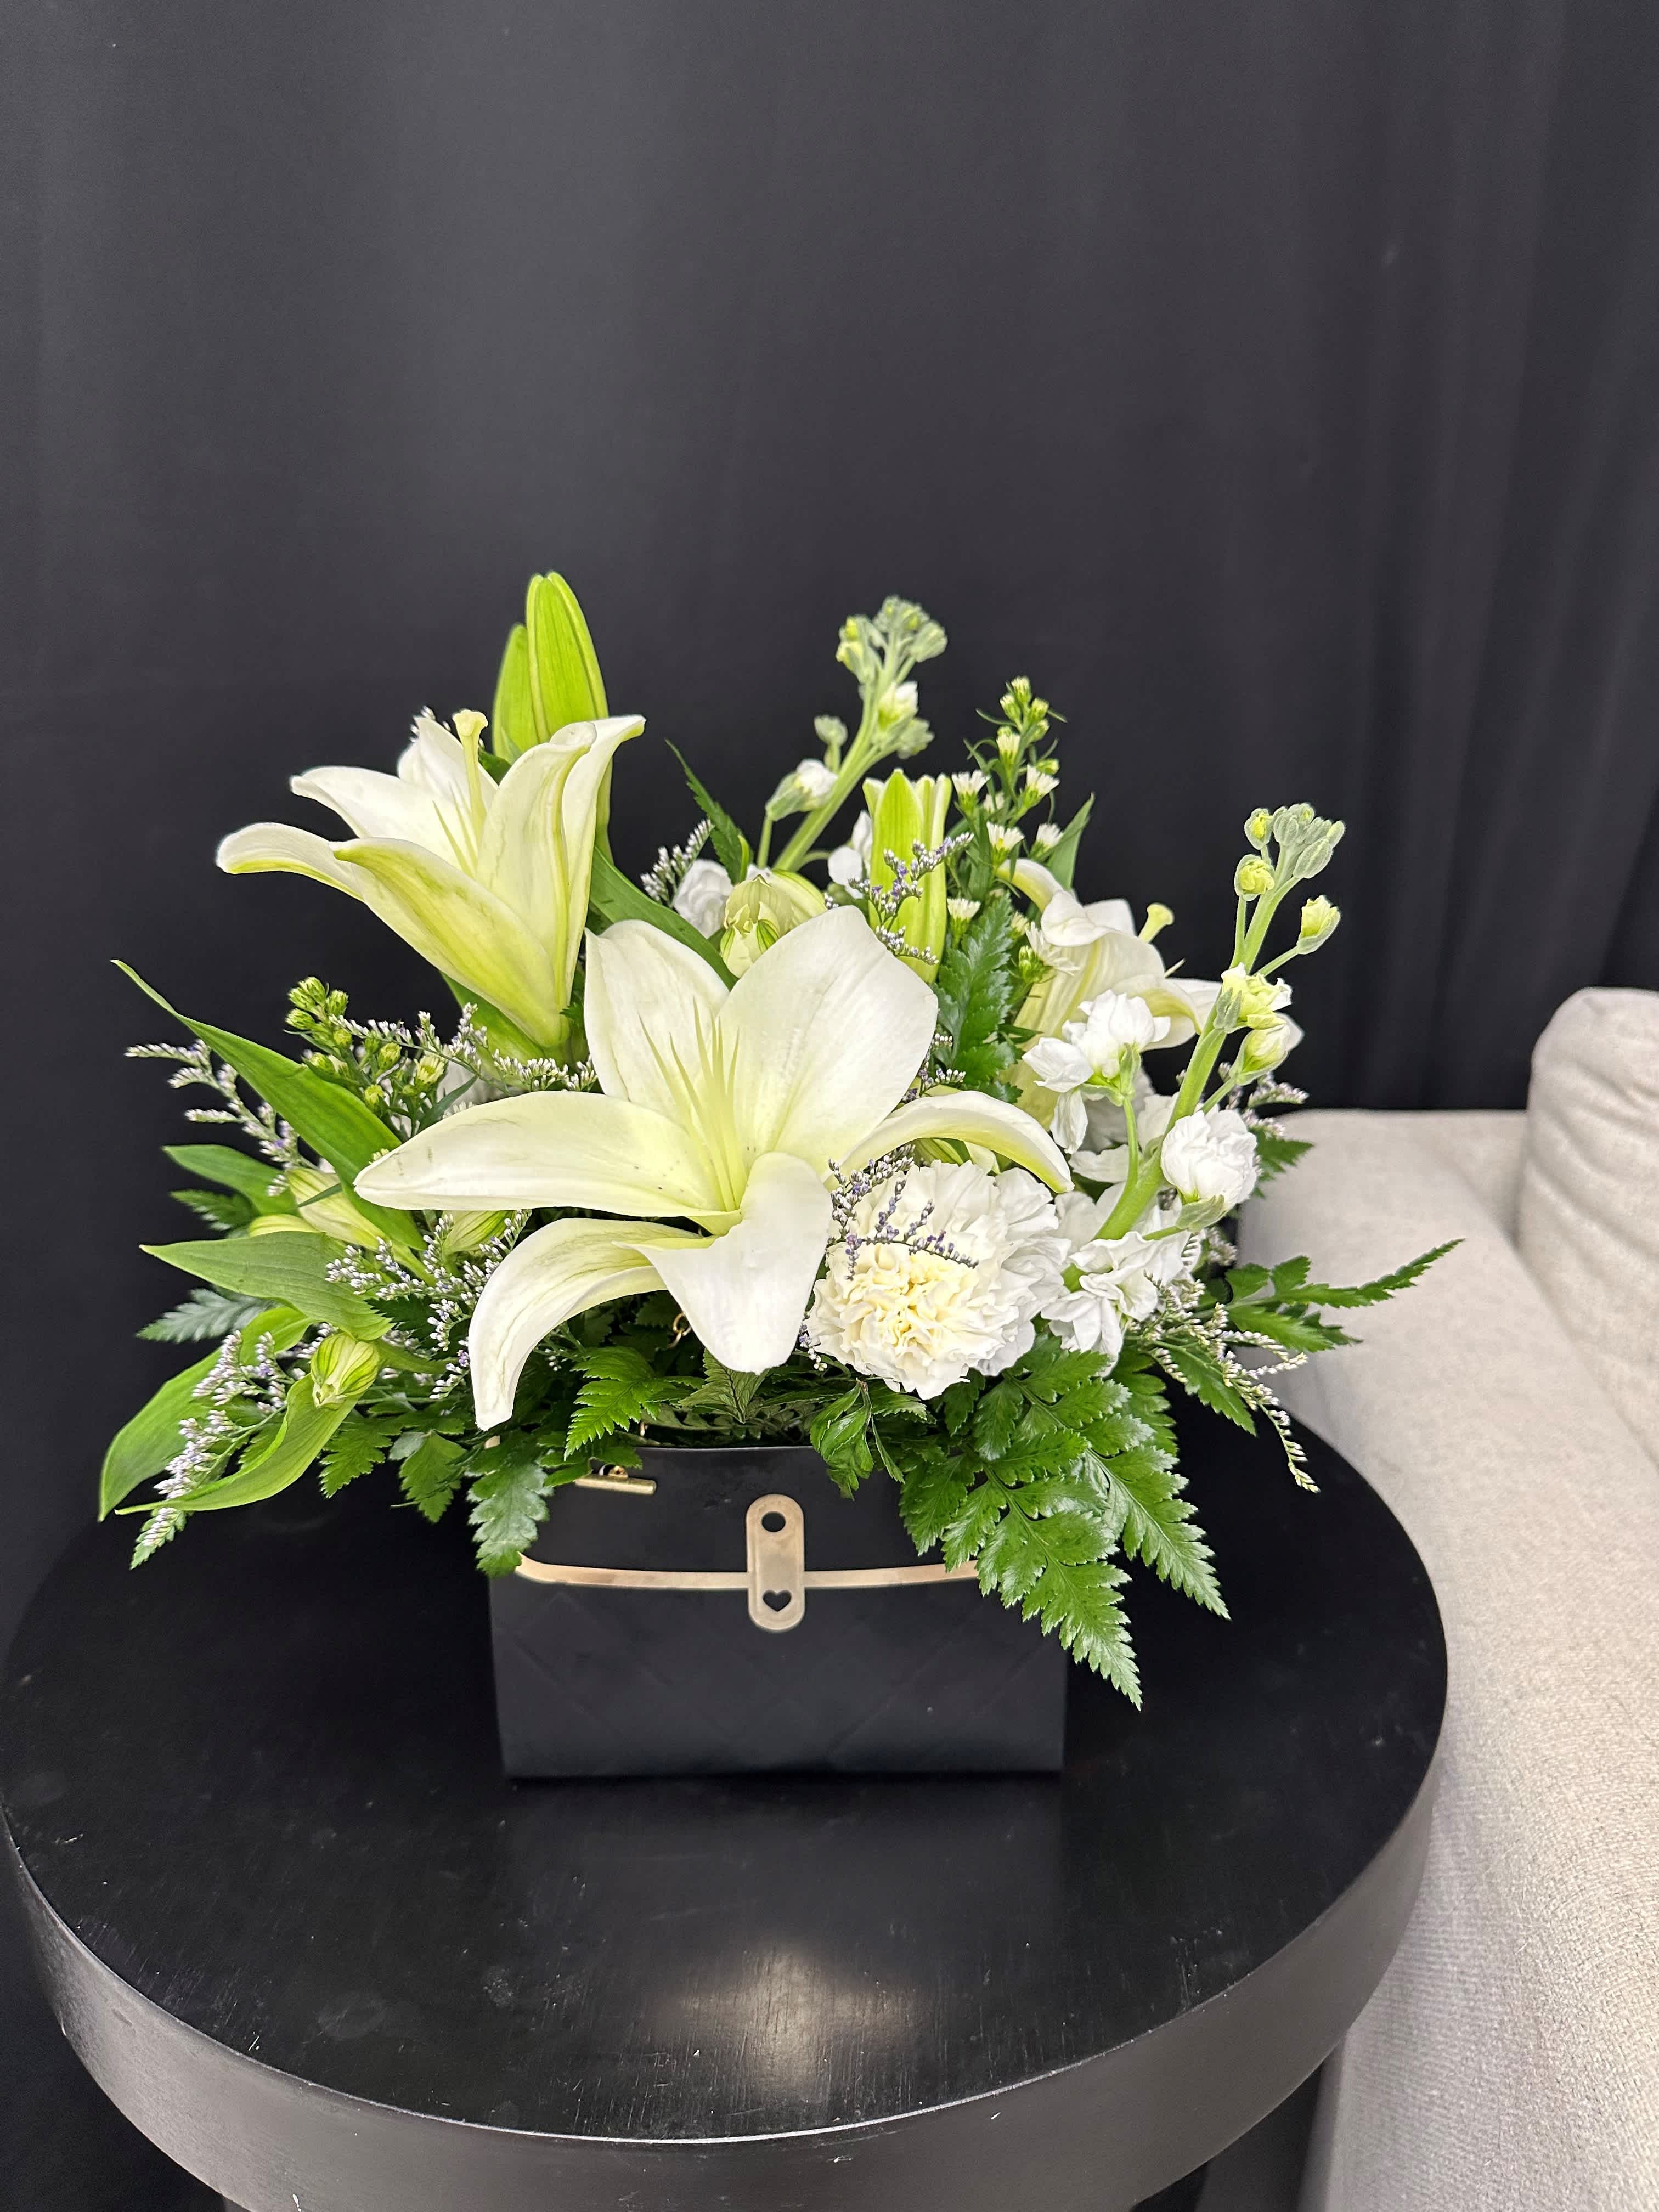 Fashion Fabulous - Unleash your fabulous side with a dainty purse brimming with yellow roses and white chrysanthemums. This charming arrangement exudes elegance and grace, making a stylish statement wherever it is displayed. Let your inner beauty shine with this delightful floral accessory.